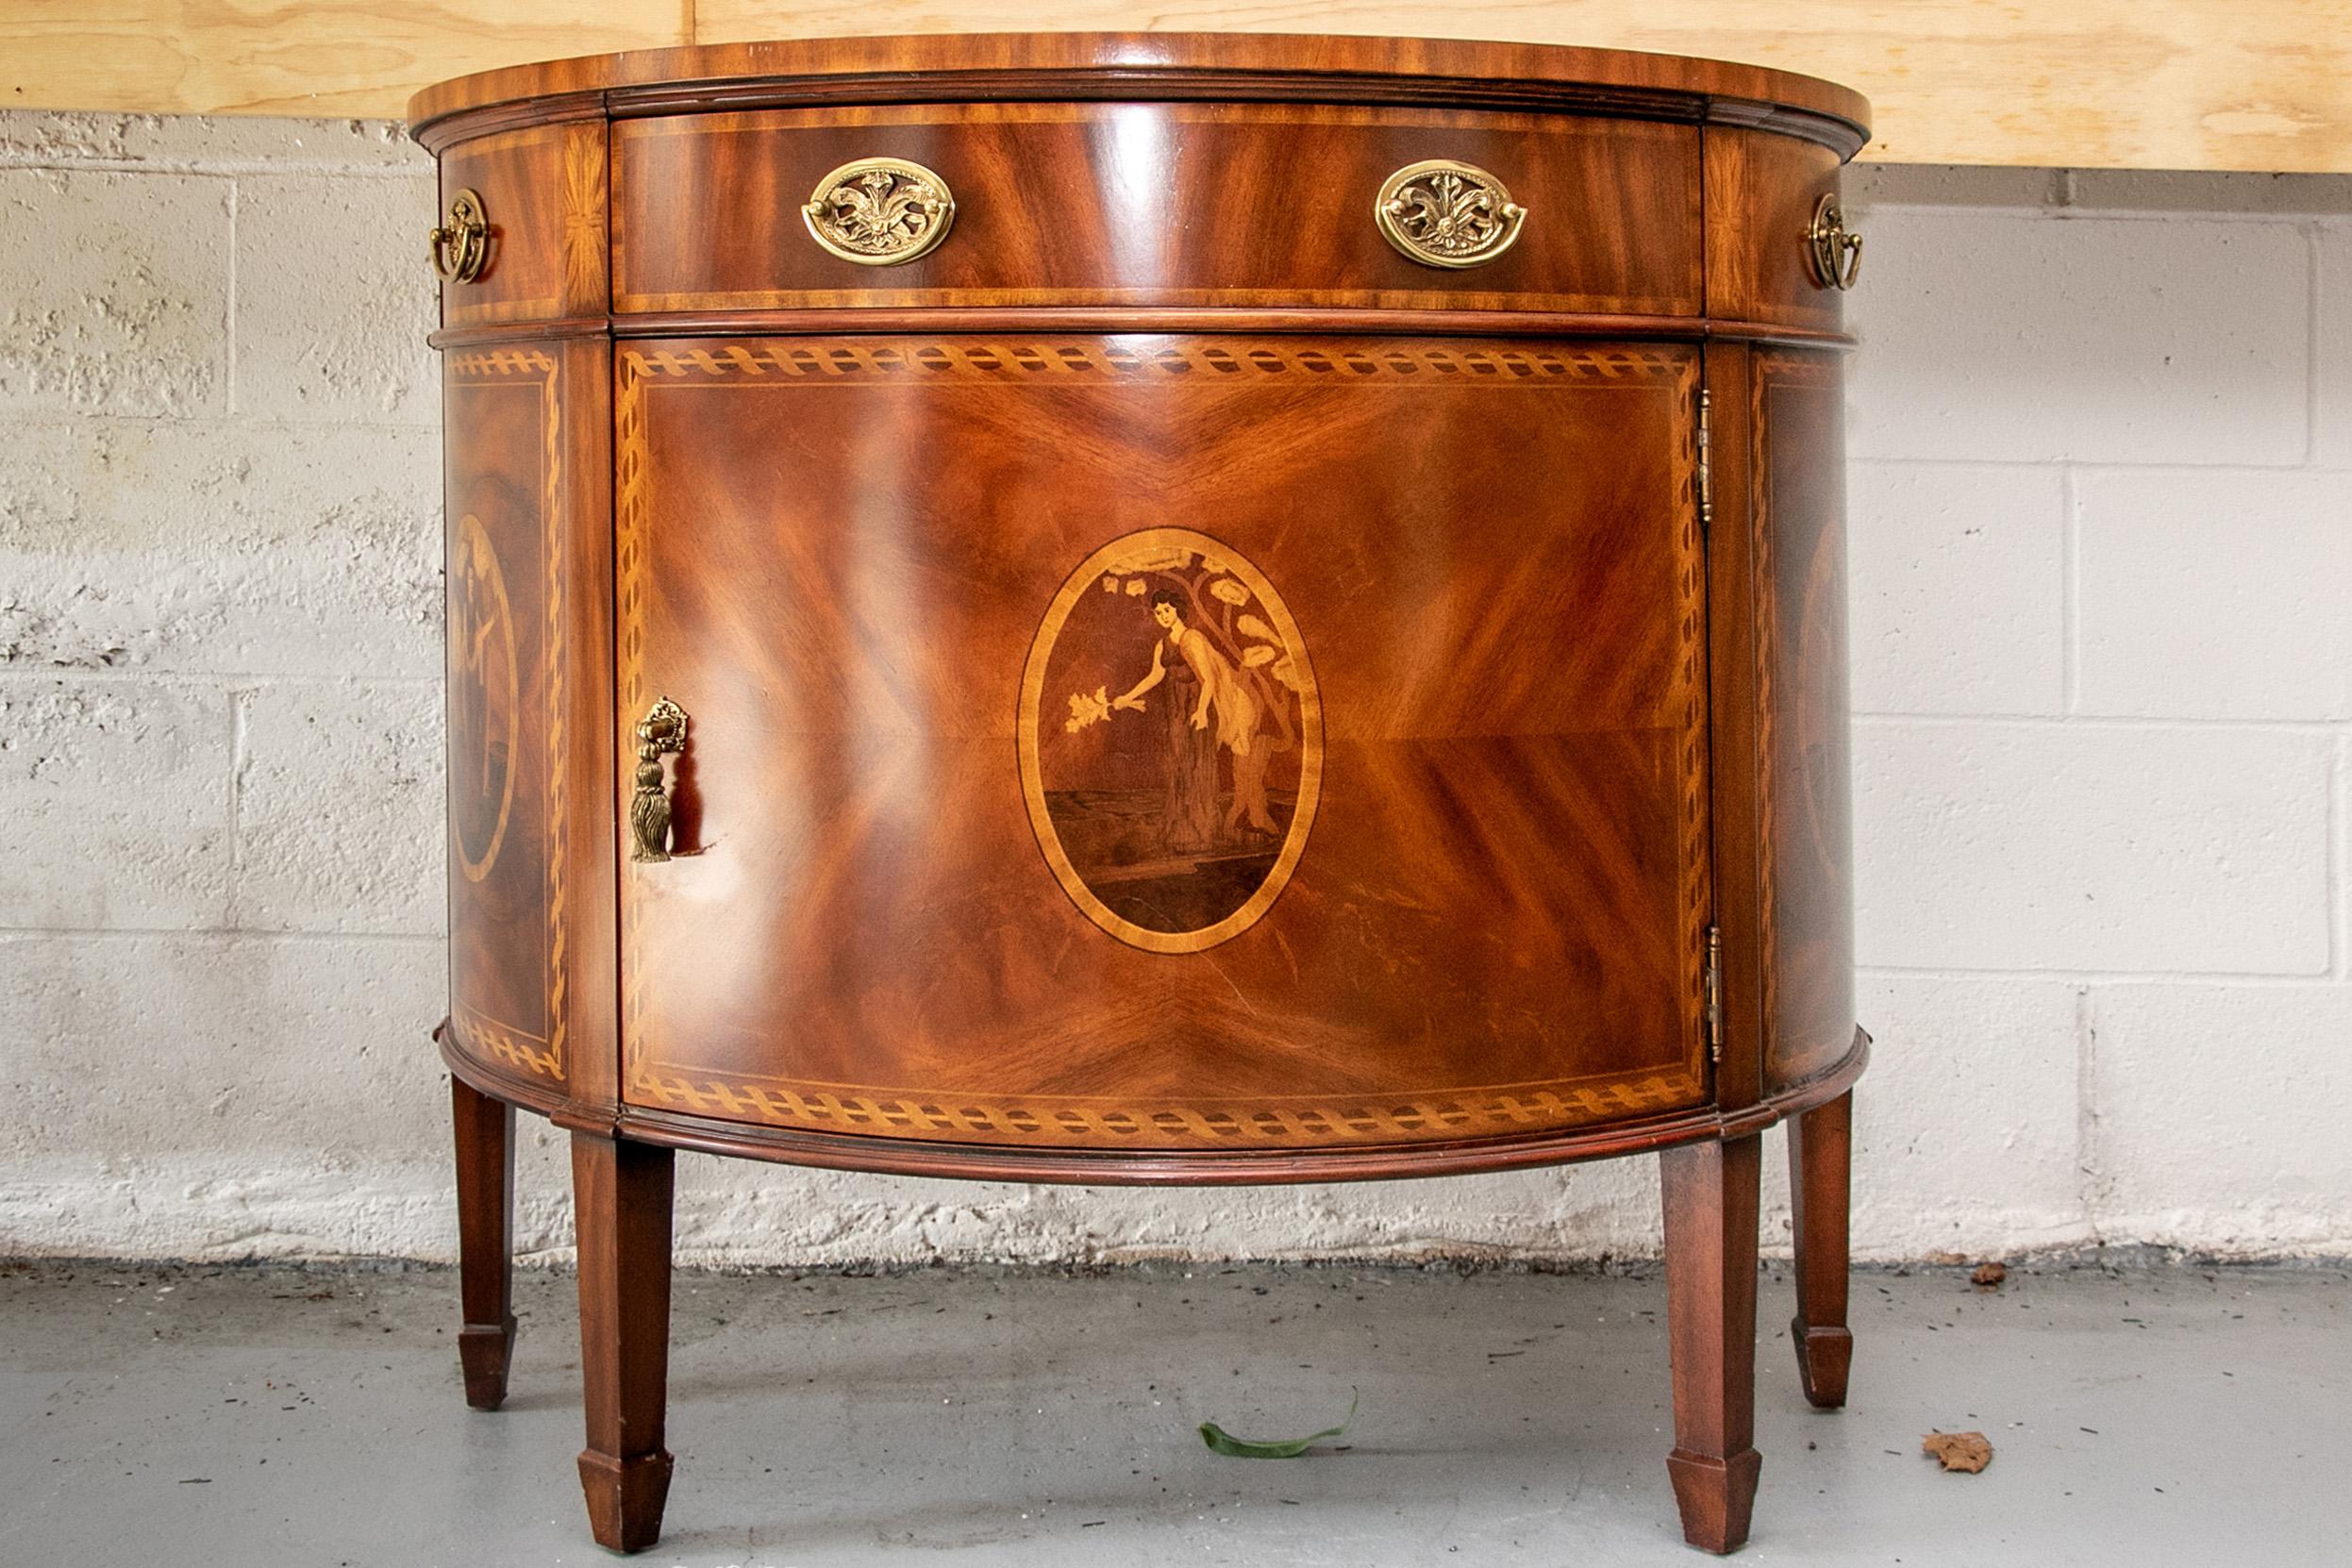 Maitland-Smith burled wood demilune commode, banded top, an apron with a center drawer and two faux side drawers. The lower cabinet with a center door opening to a single shelf. Both door and sides with marquetry panels with neoclassical female